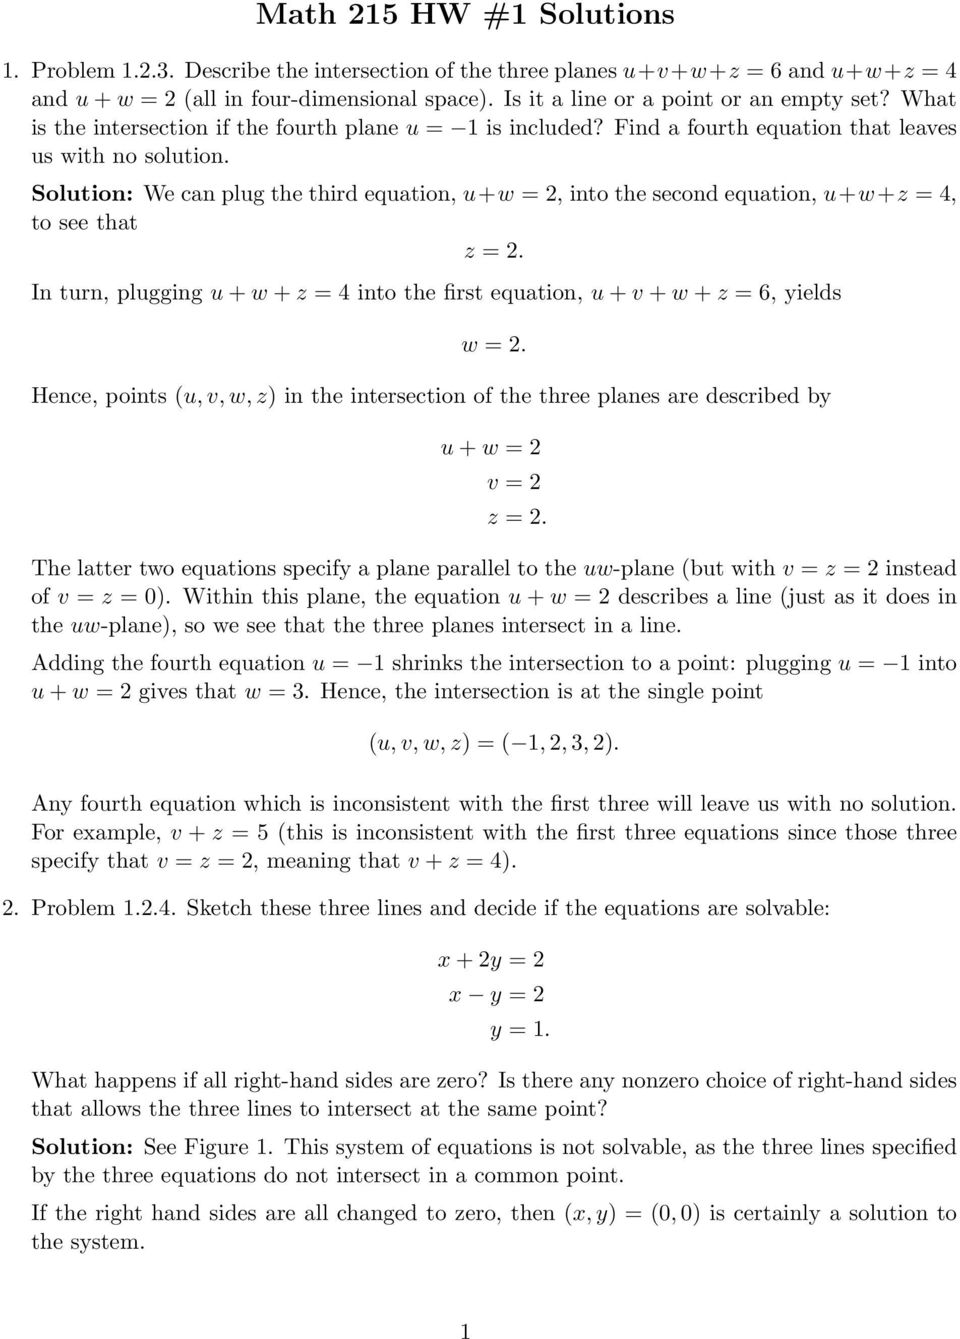 Solving Simultaneous Equations Using Matrices 2x2 Worksheet